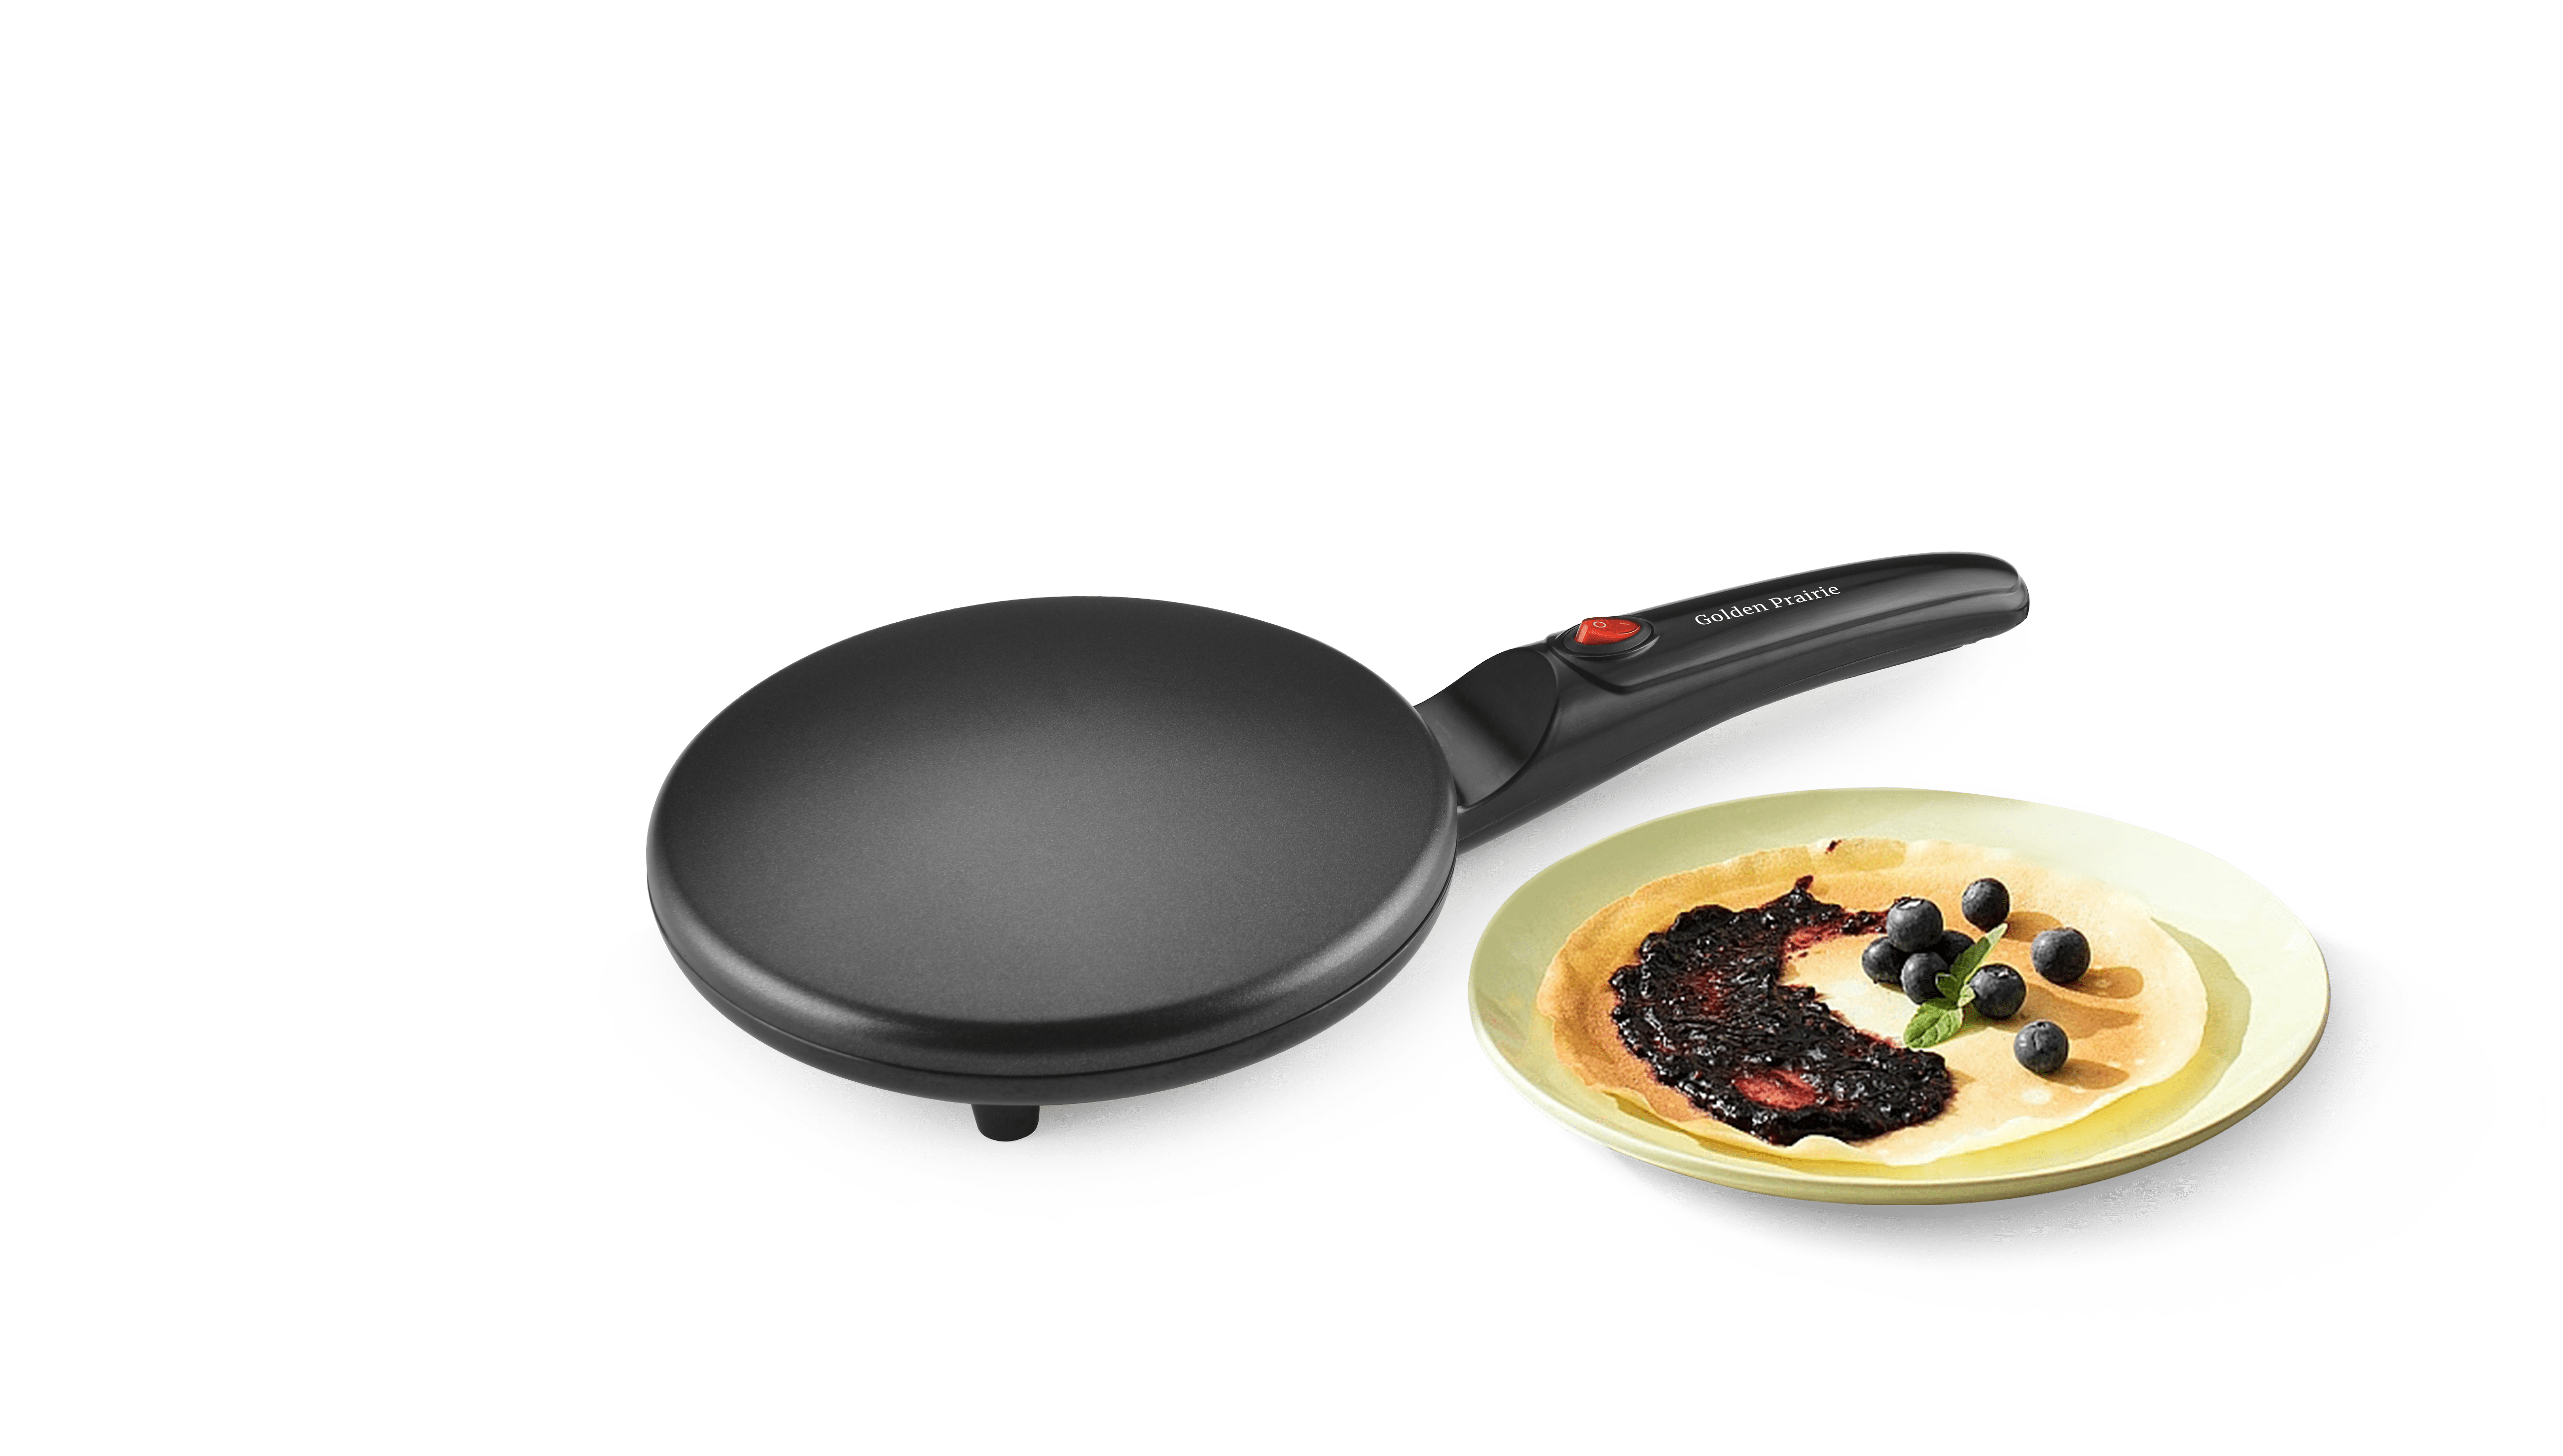 Liven Electric Baking Pan LR-FD431 Skillet Griddle, US Dupont Non-Stick Coating,Detachable Upper and Lower Grill Pan, Easy to Clean 610340